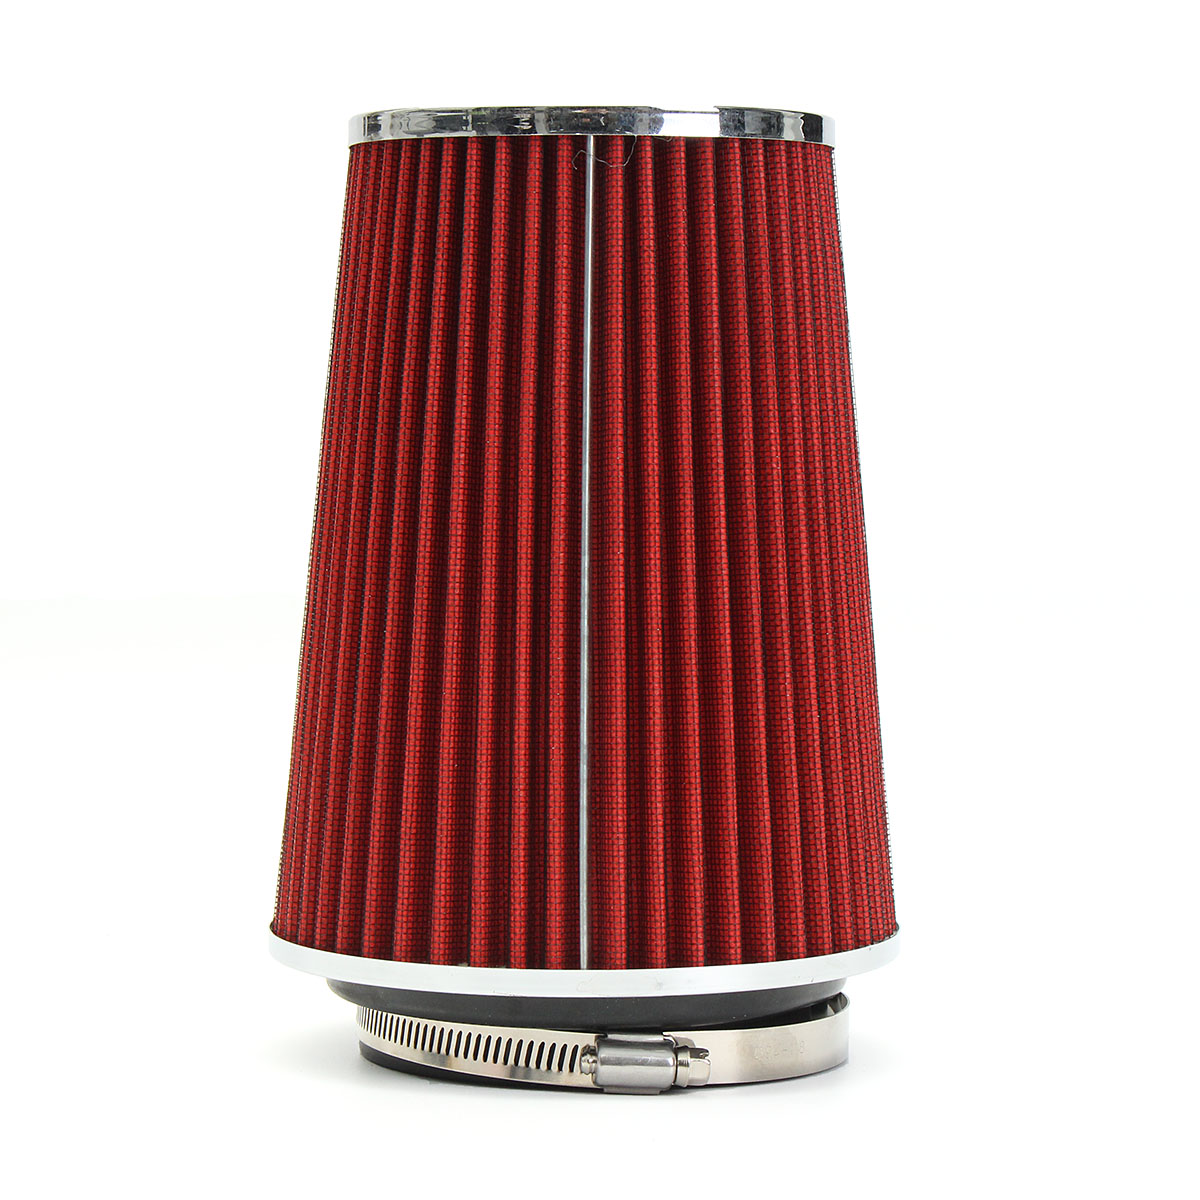 4-Inch-Red-Truck-Long-Performance-High-Flow-Cold-Air-Intake-Cone-Dry-Filter-Car-Air-Filter-1149892